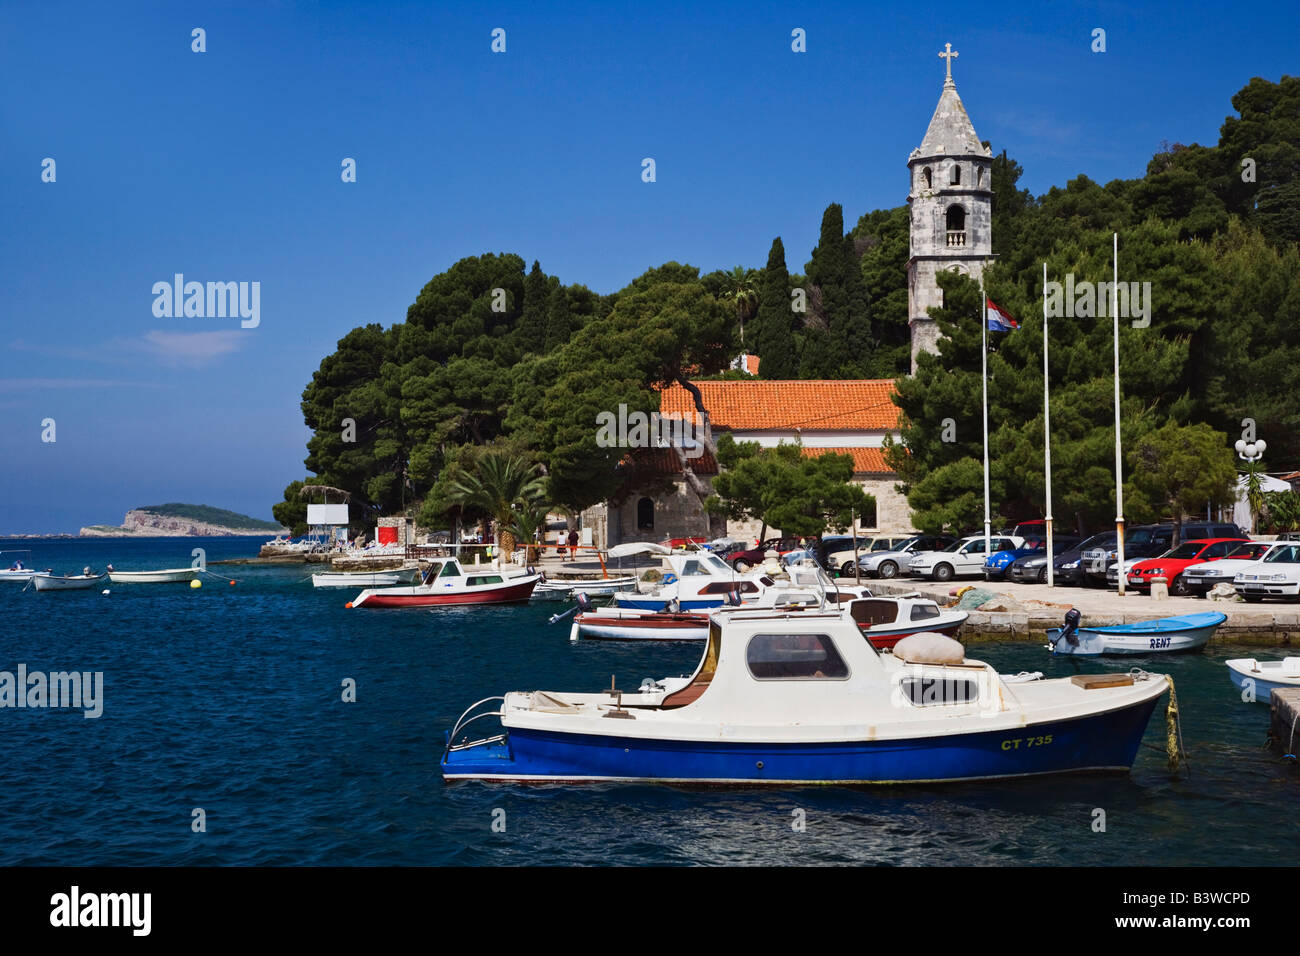 Small boats docked in harbor, Hvar Island, one of the most famous Dalmatian Islands, Croatia Stock Photo